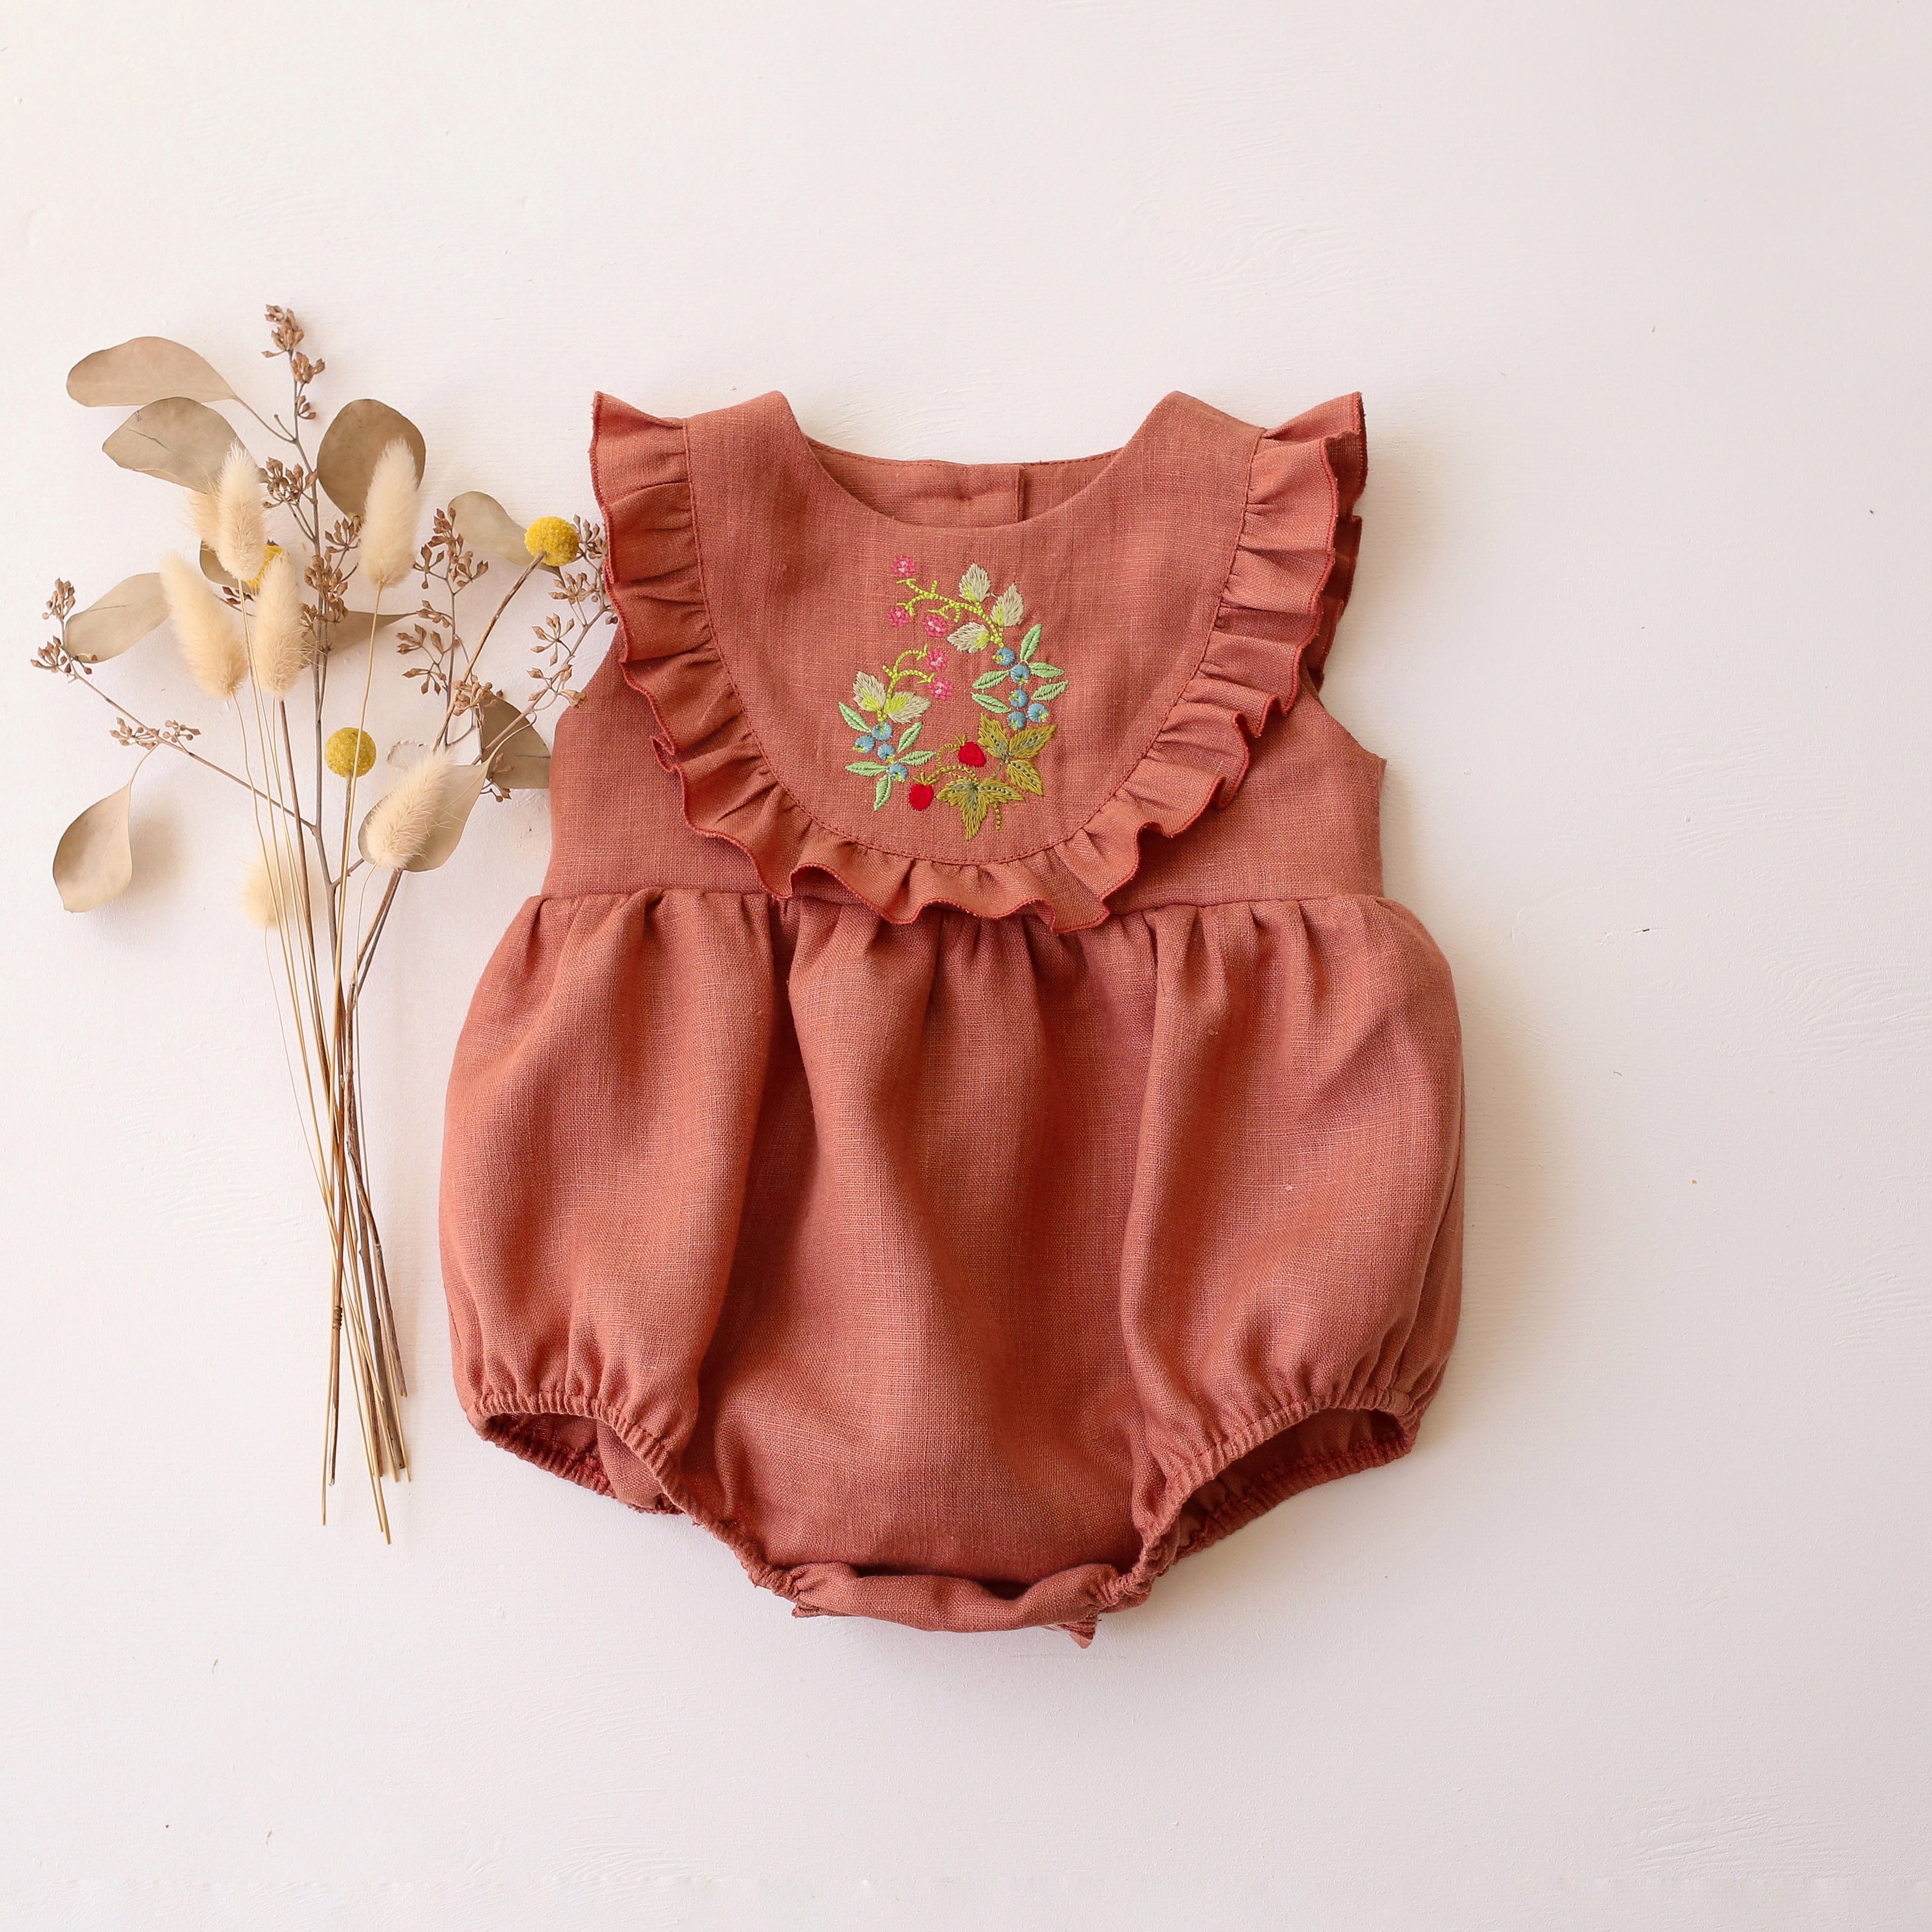 Rose Bouquet Linen Ruffled Bodice Bubble Playsuit with “Berries” Embroidery